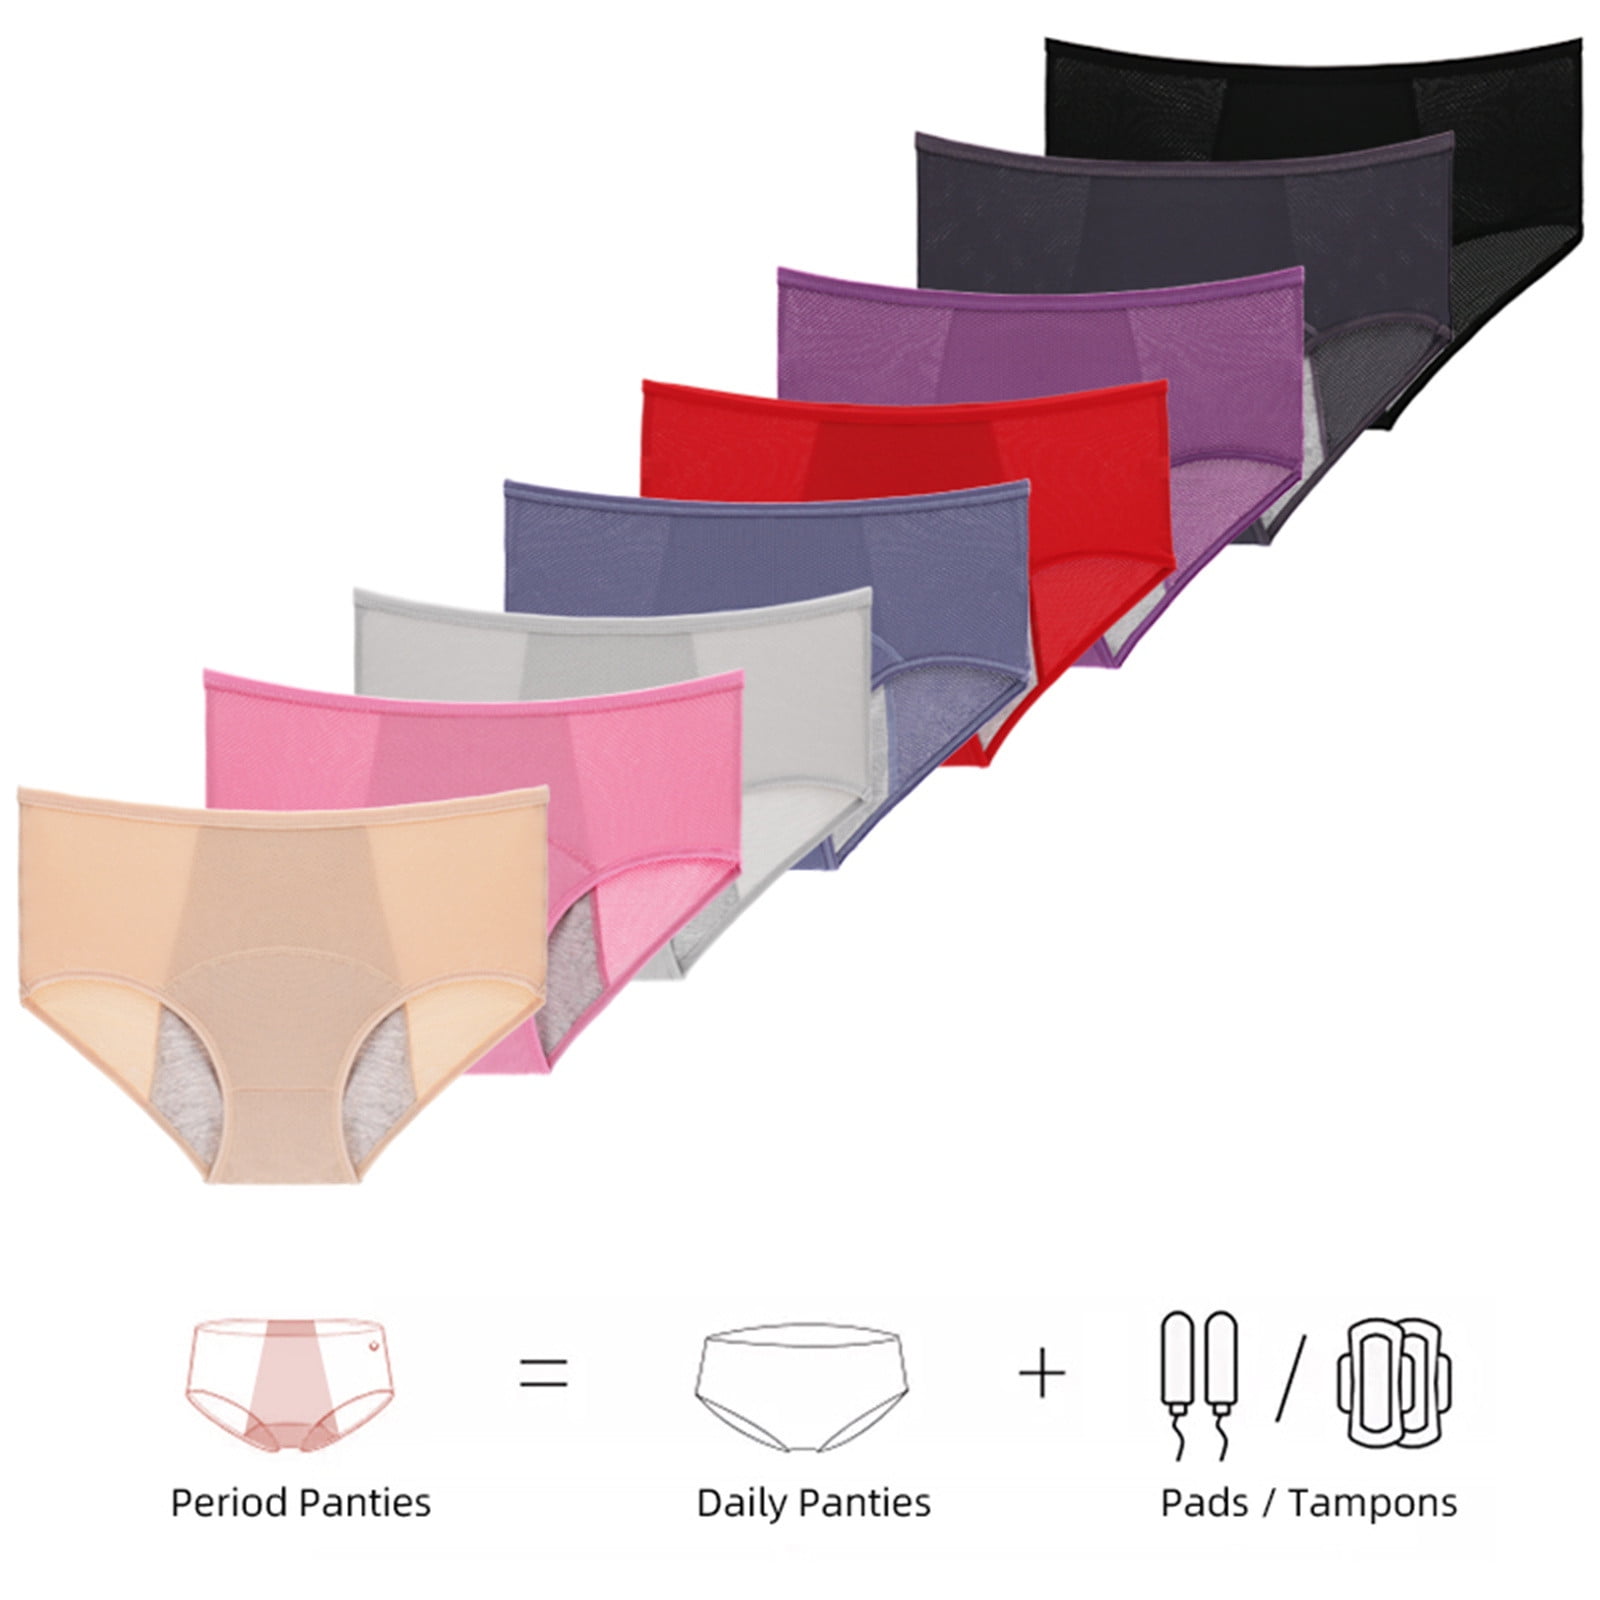 FINETOO High Waisted Thongs for Women, Breathable Underwear Soft Stretchy  Nylon Spandex No Side Seam Panties S-XL 4/6 Pack 